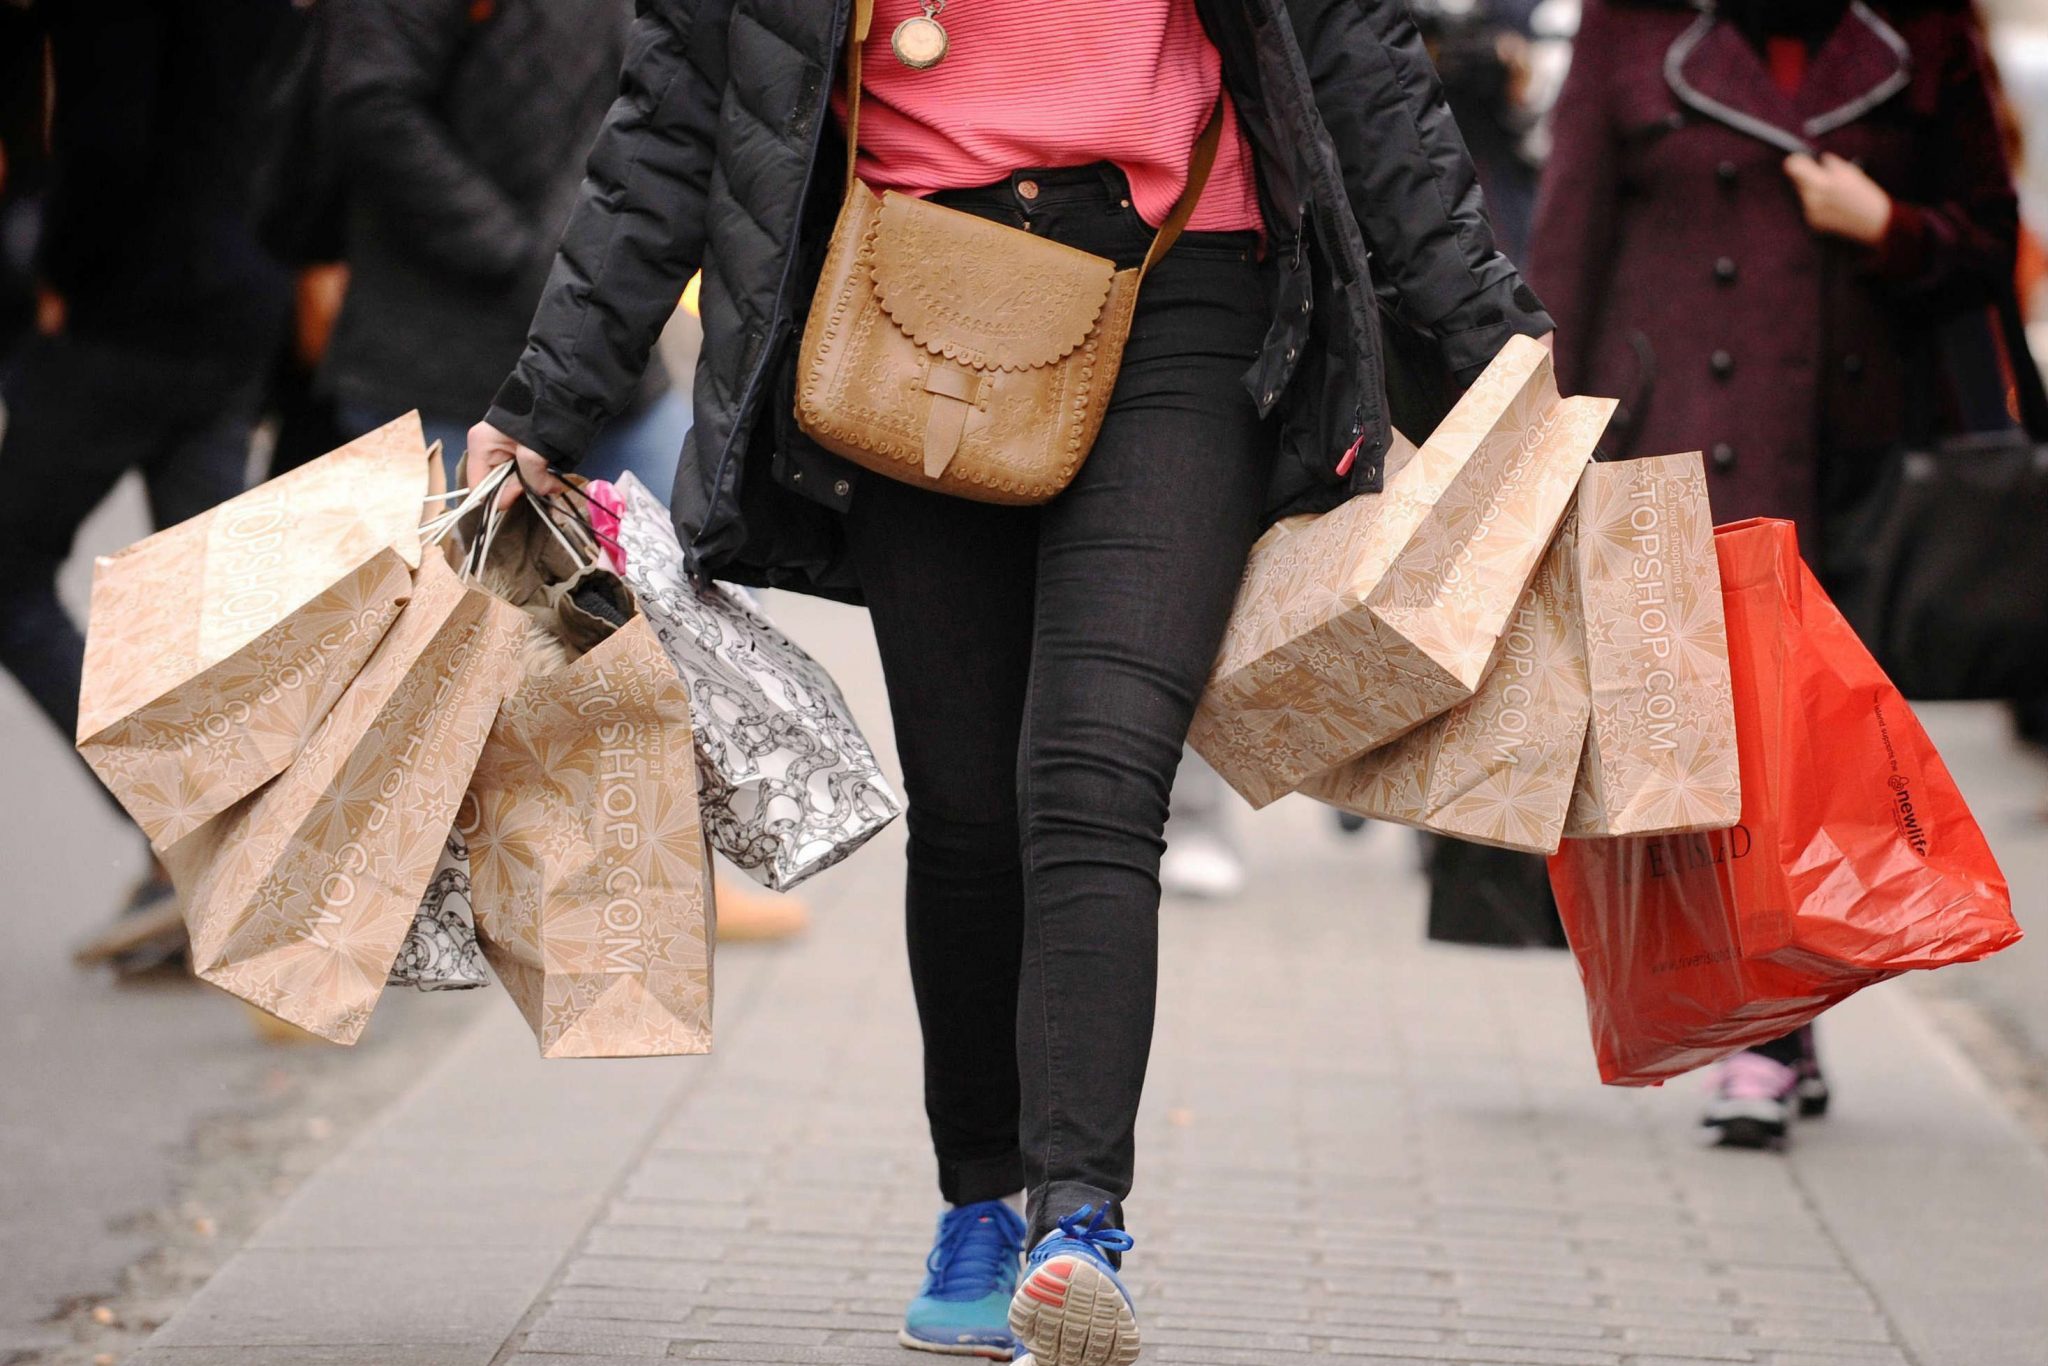 Black Friday spending volumes exceeded those of both 2020 and the pre-pandemic shopping day in 2019